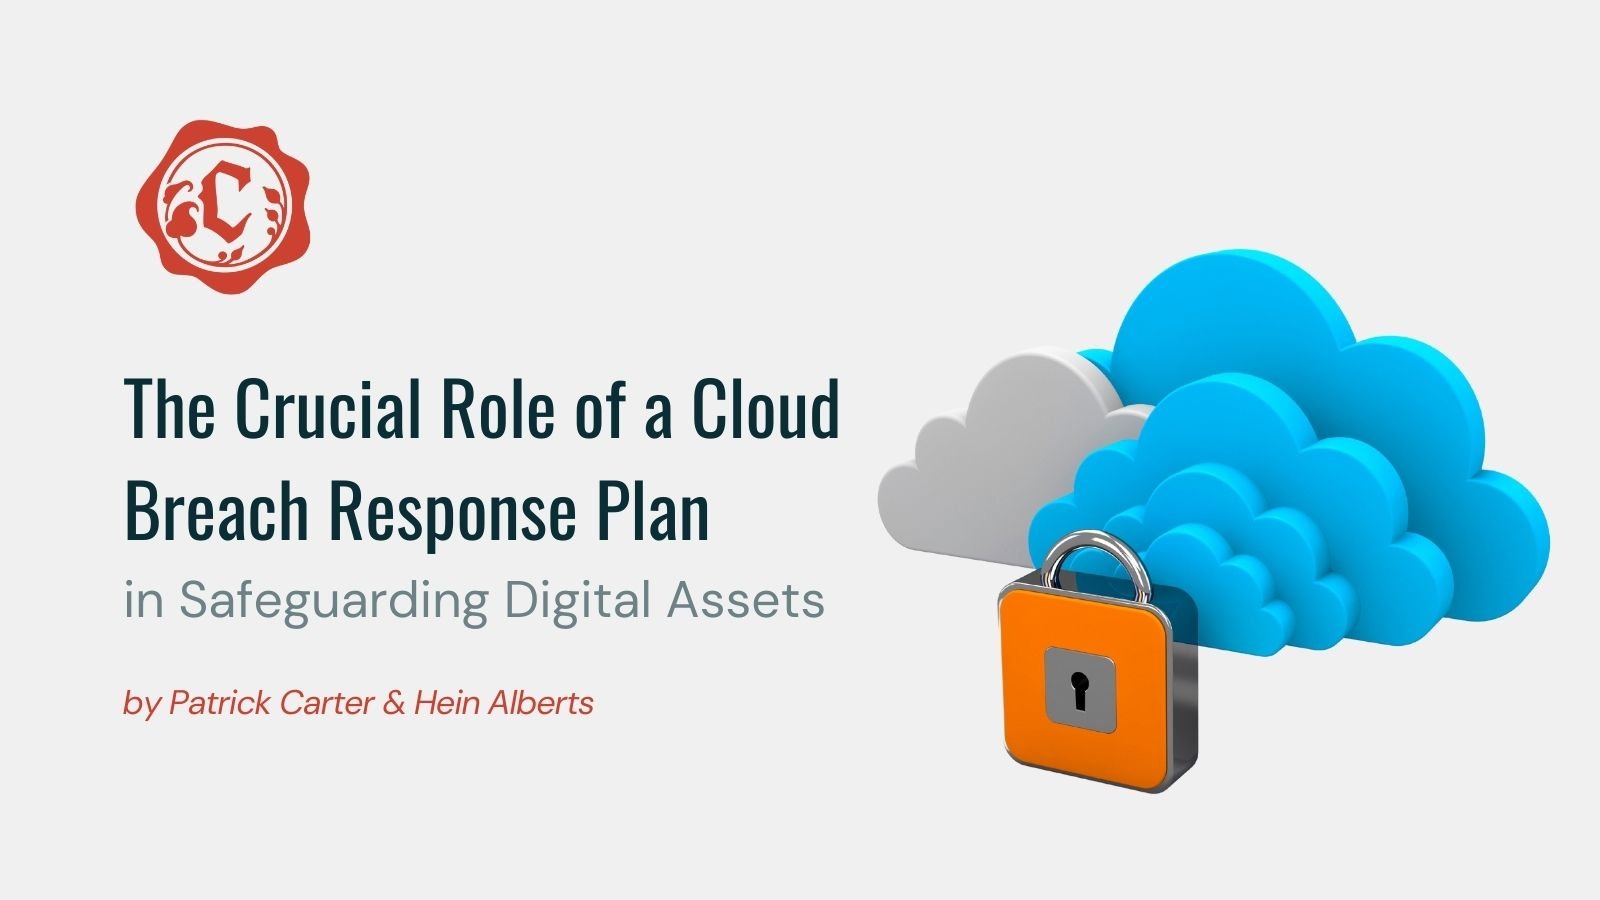 The Crucial Role of a Cloud Breach Response Plan in Safeguarding Digital Assets